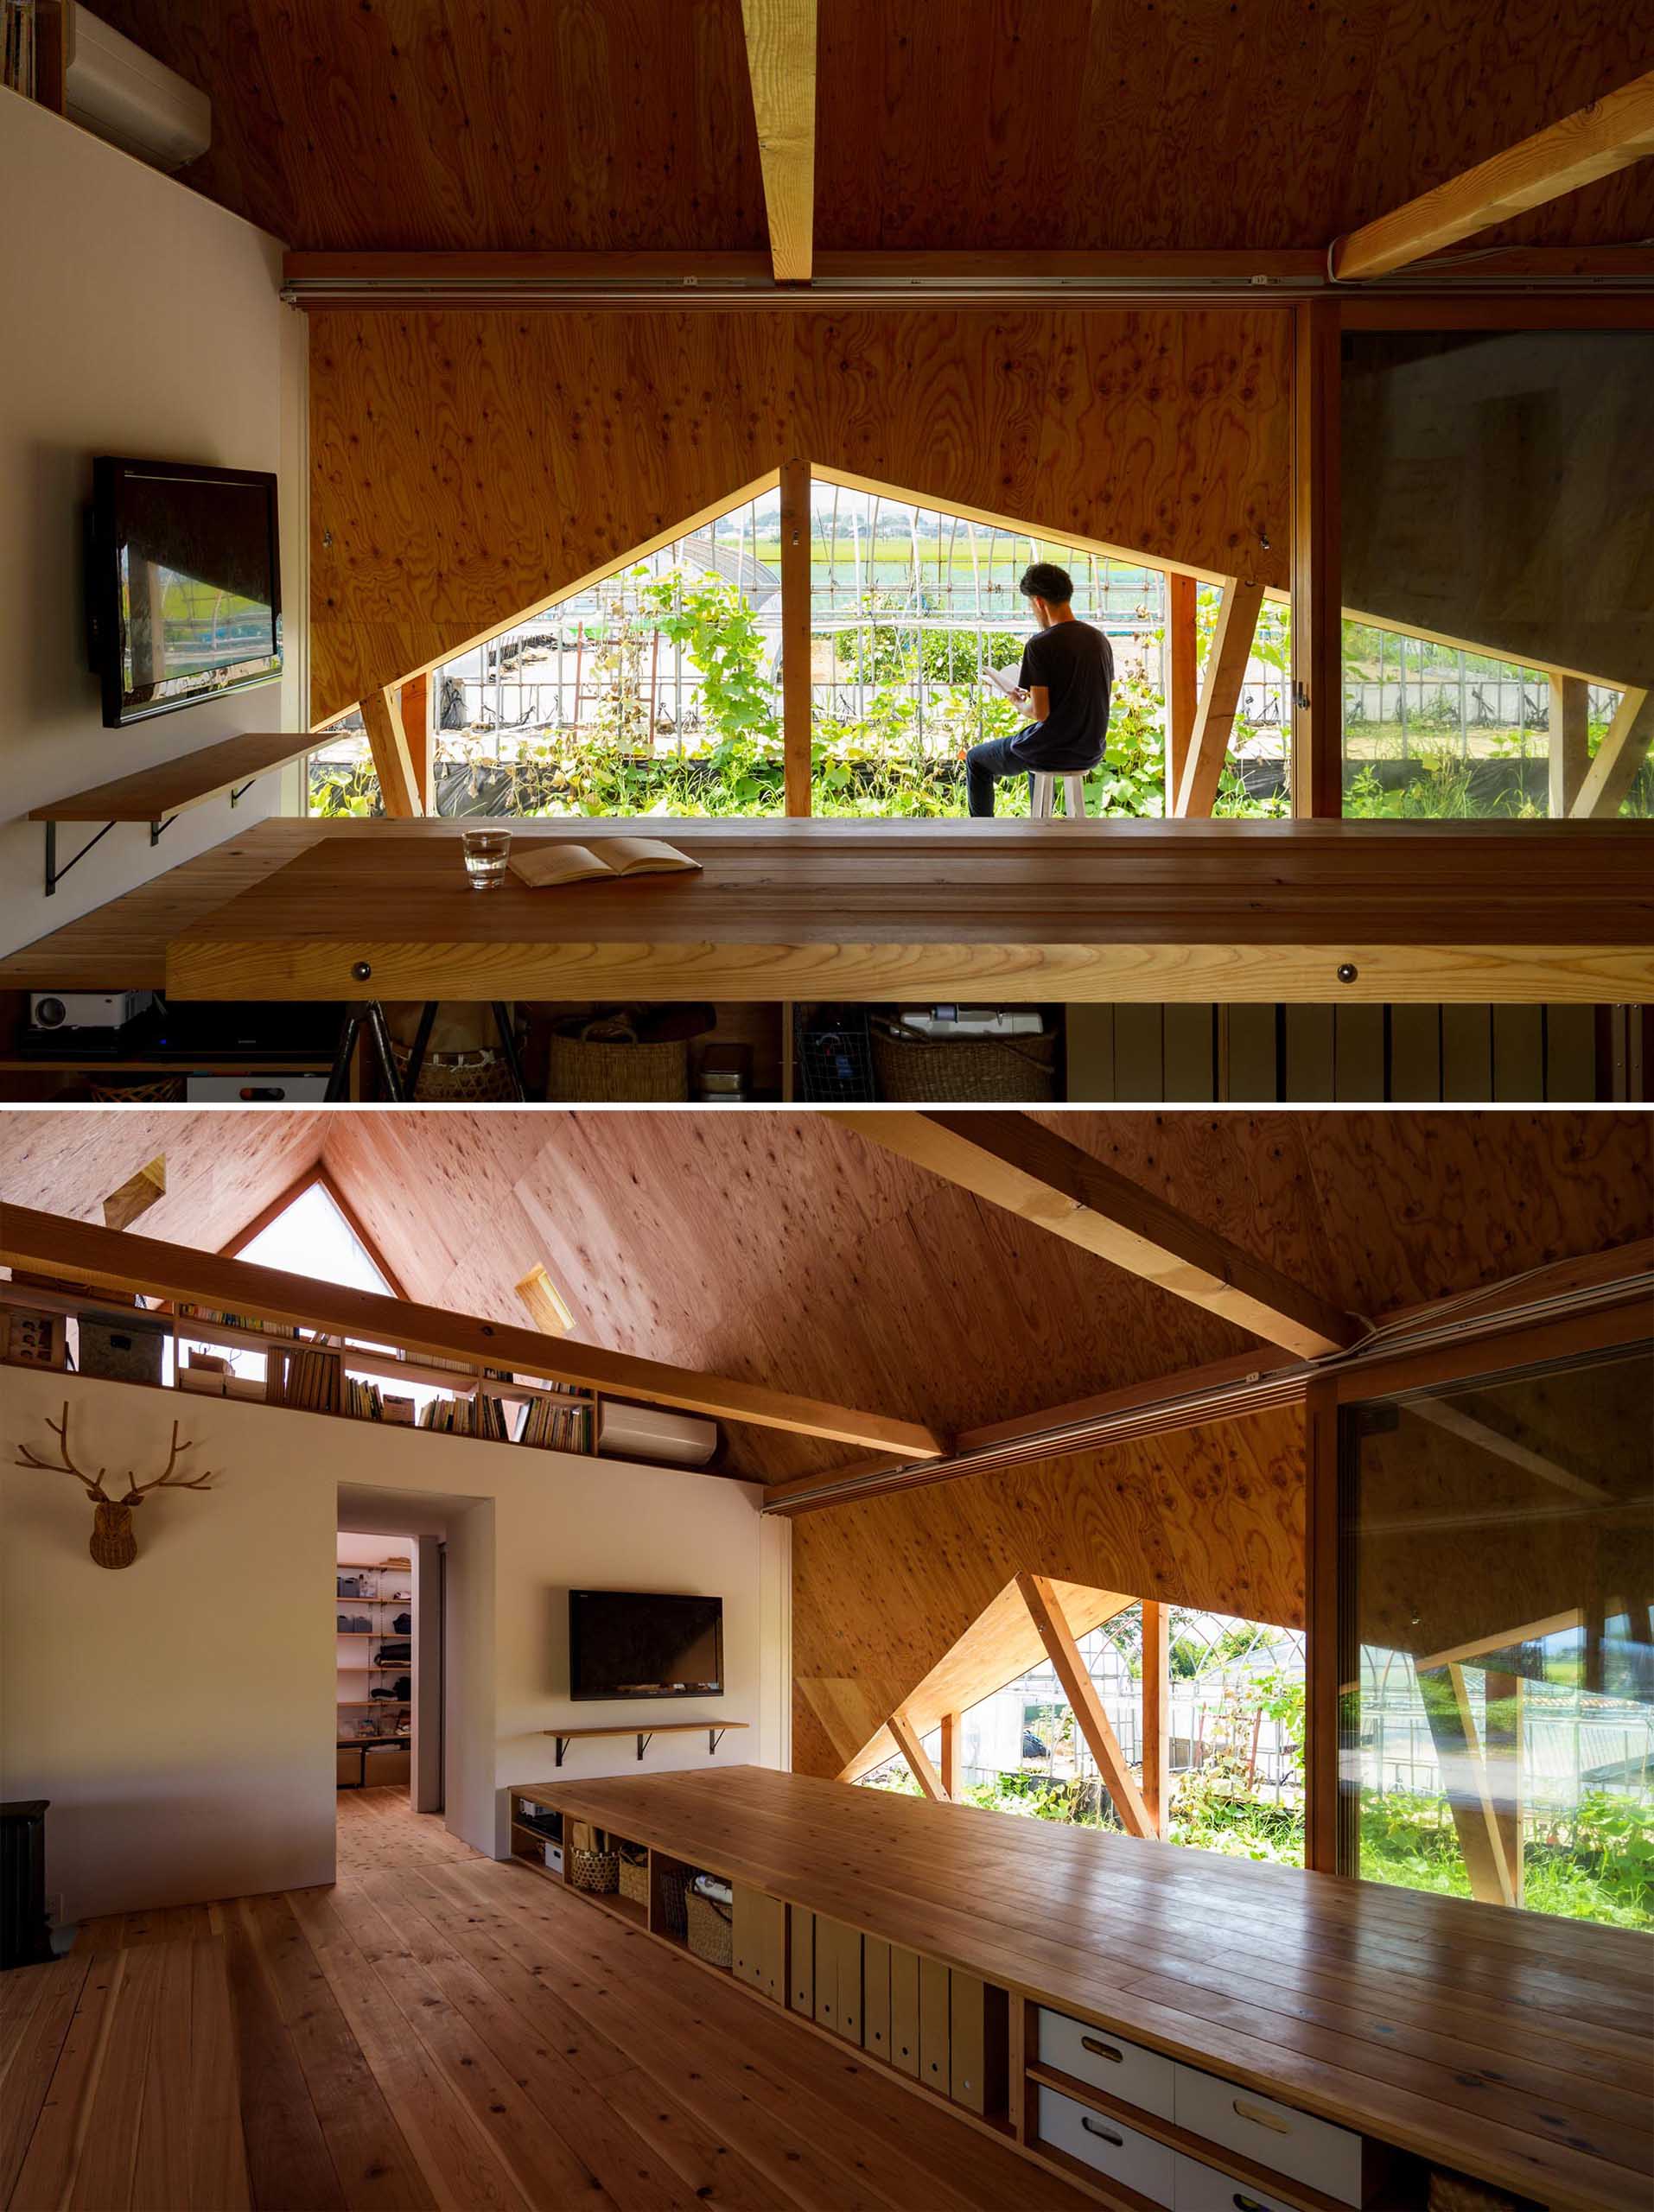 Large wood framed sliding glass doors can open the interior of this modern A-frame house to the outdoors, and at the same time, allow for cross-ventilation.